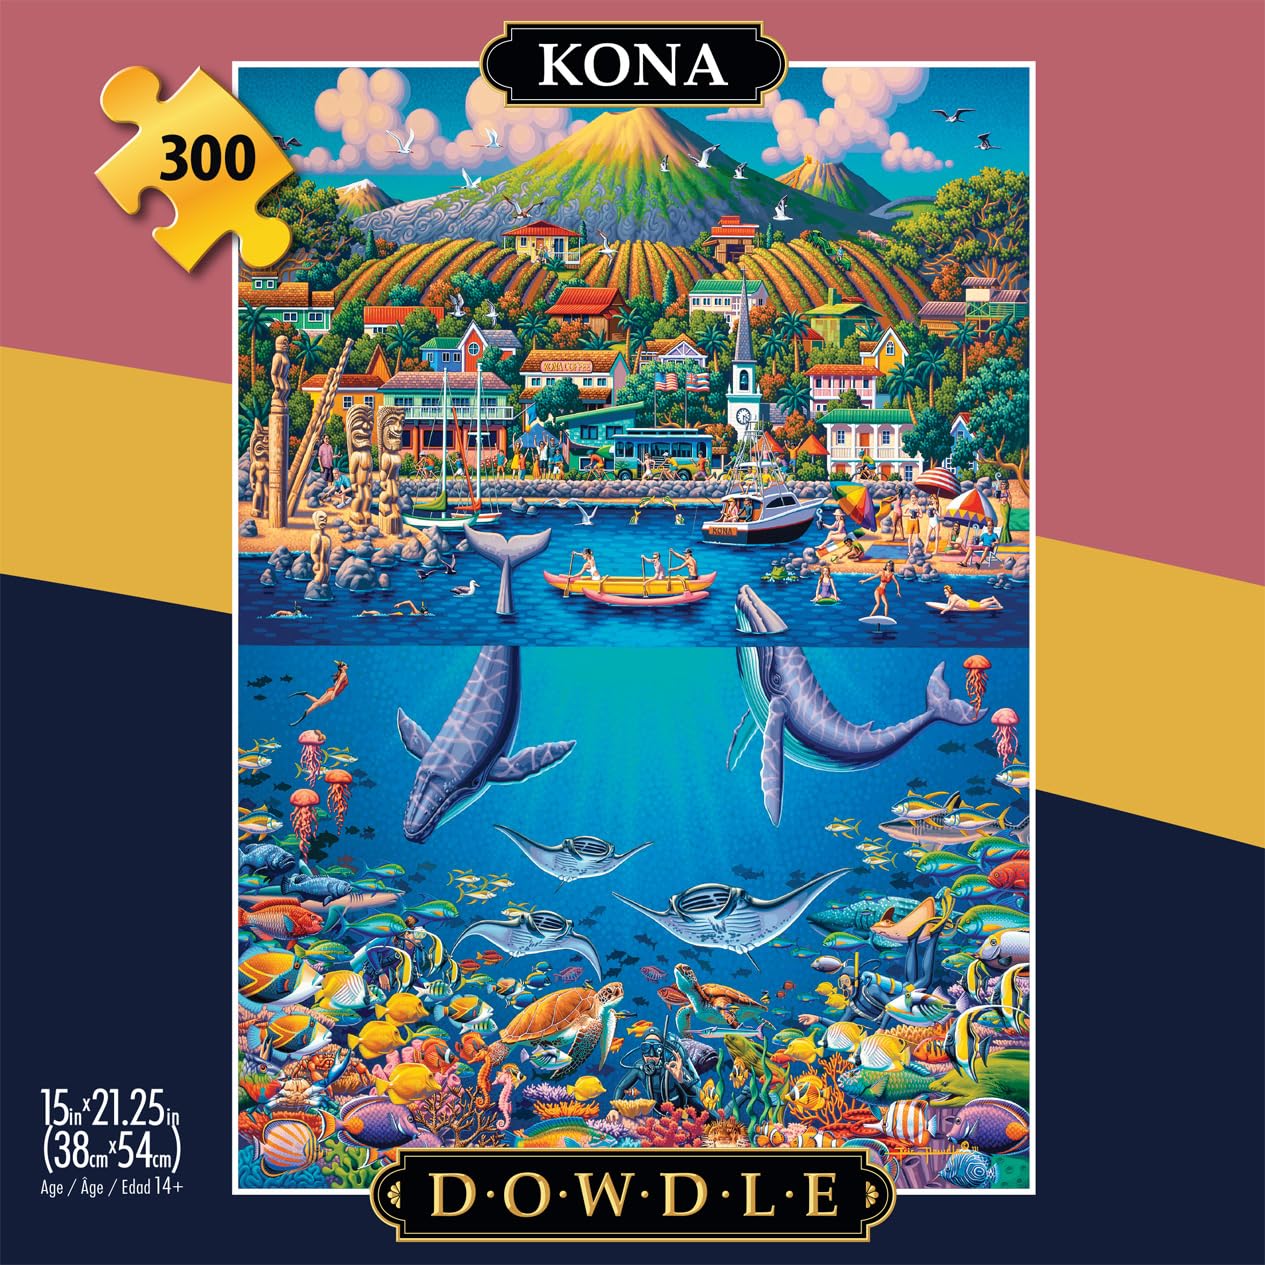 Buffalo Games - Dowdle - Kona - 300 Large Piece Jigsaw Puzzle for Adults Challenging Puzzle Perfect for Game Nights - Finished Size 21.25 x 15.00